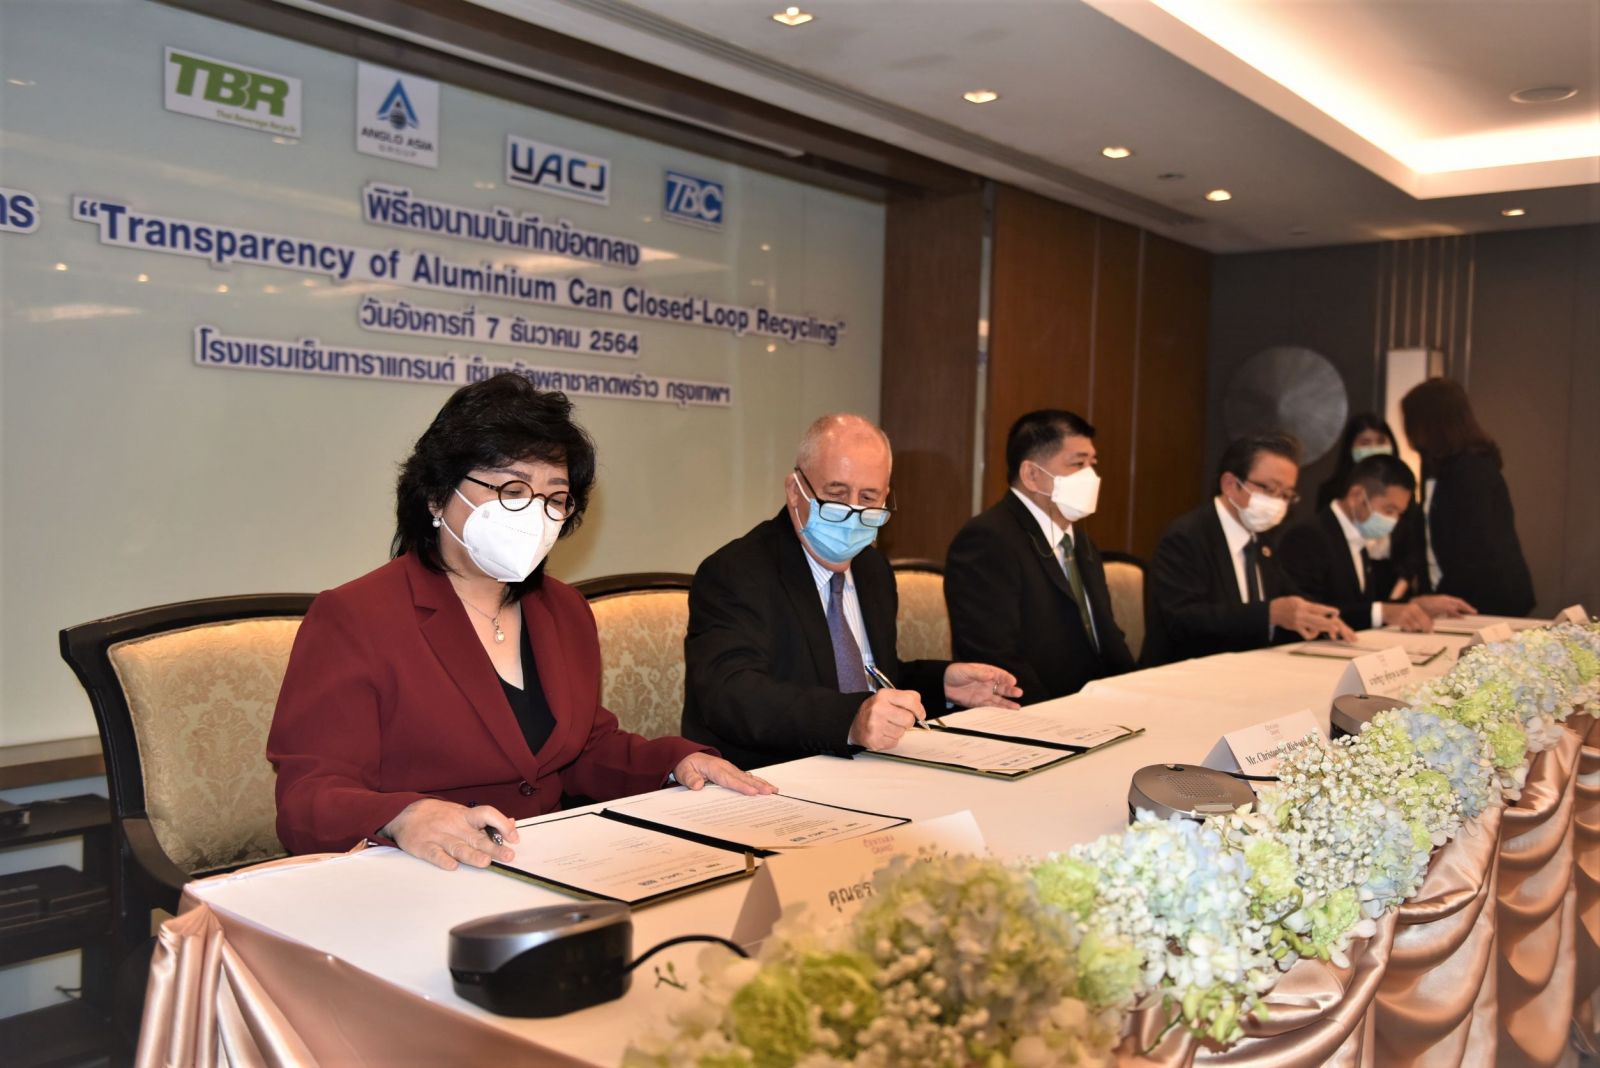 ThaiBev Joins “Transparency of Aluminium Can Closed-Loop Recycling”